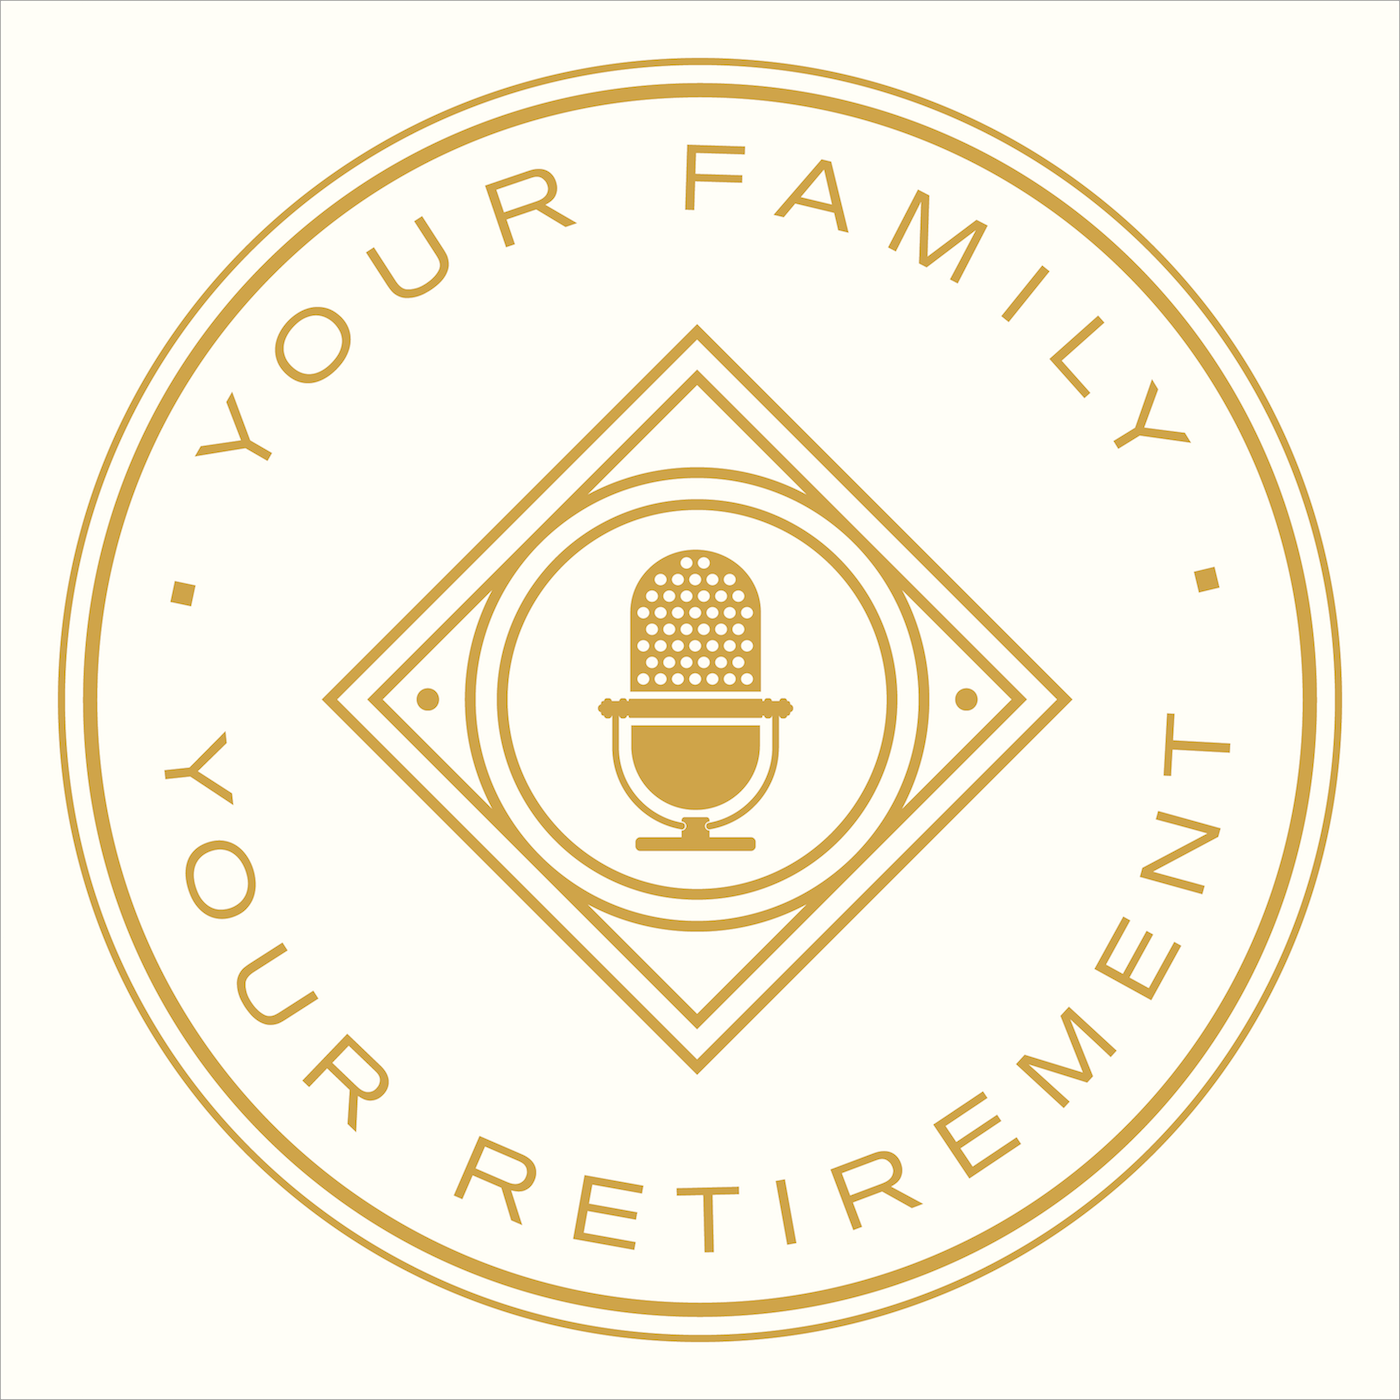 What retiree category do you fall into?